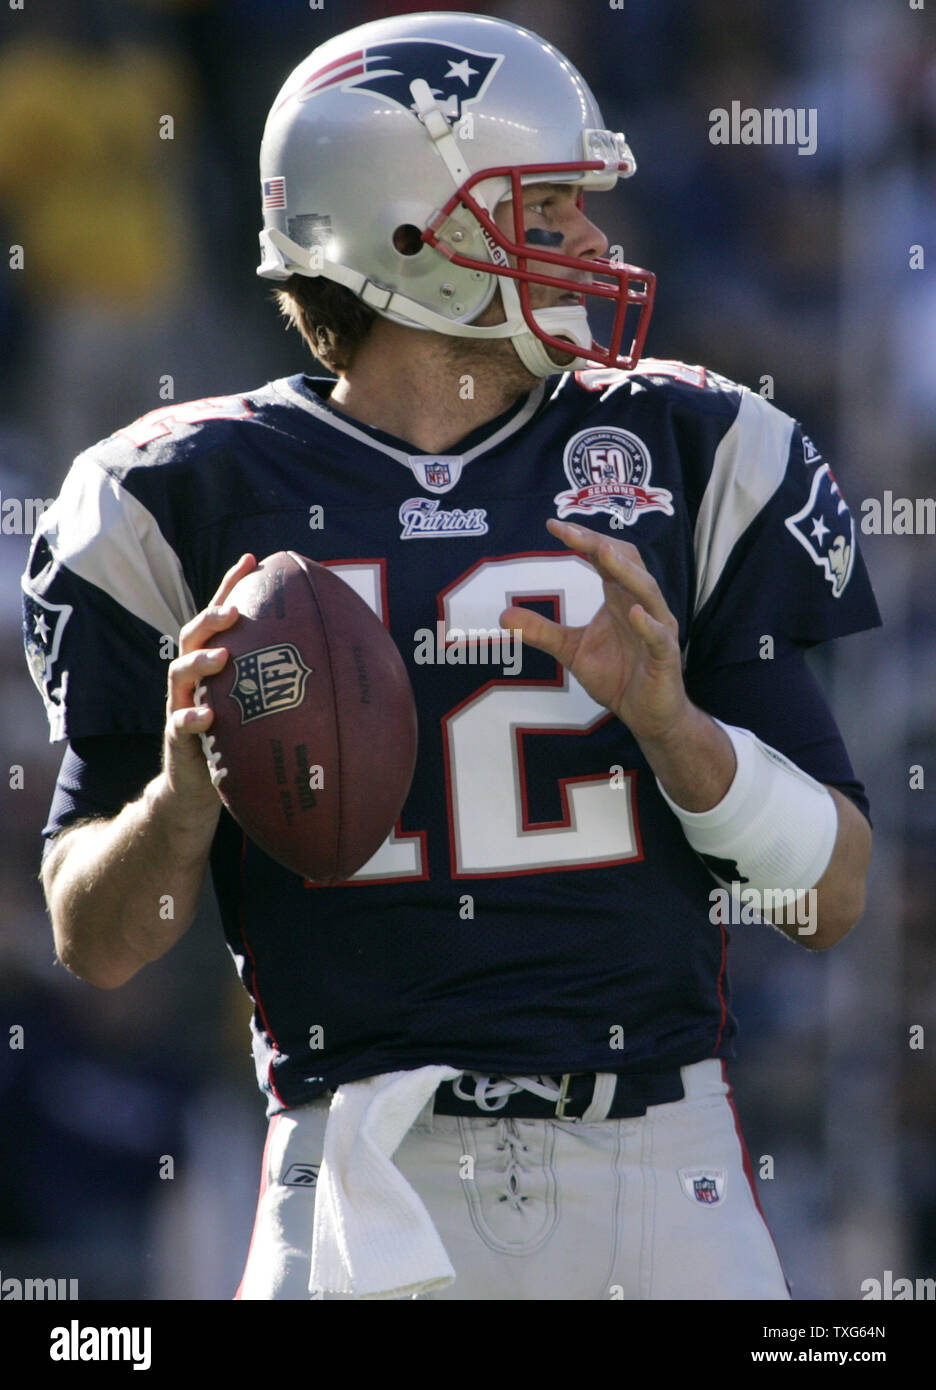 New England Patriots quarterback Tom Brady (12) drops back for a pass against the Miami Dolphins in the first quarter at Gillette Stadium in Foxboro, Massachusetts on November 8, 2009.    UPI/Matthew Healey Stock Photo